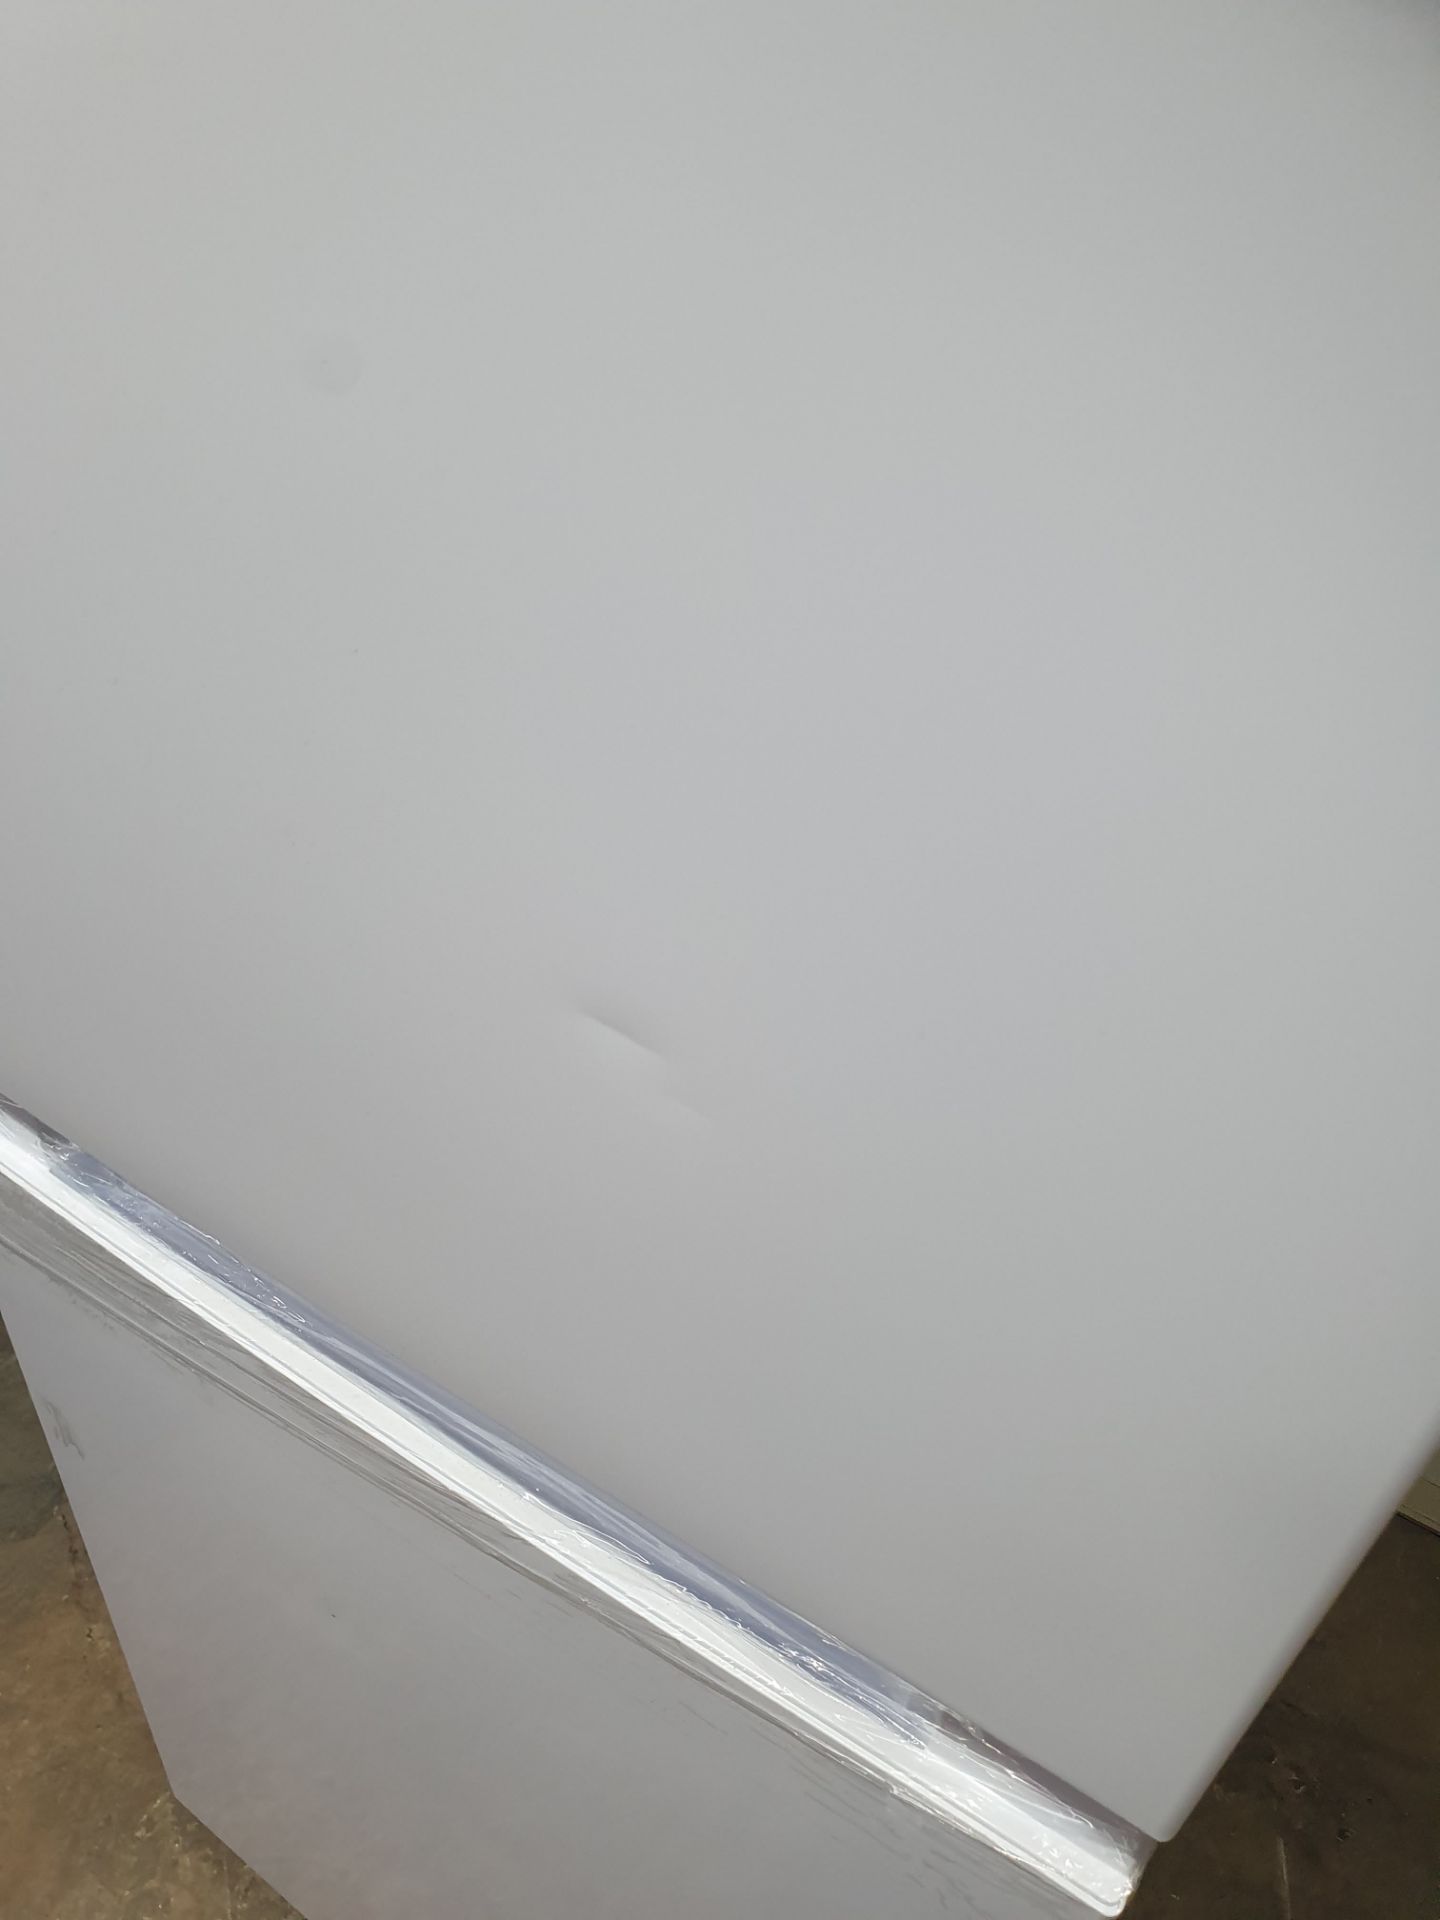 Ex-Display Montpellier MS150W Low Frost Fridge Freezer in White - Image 10 of 12